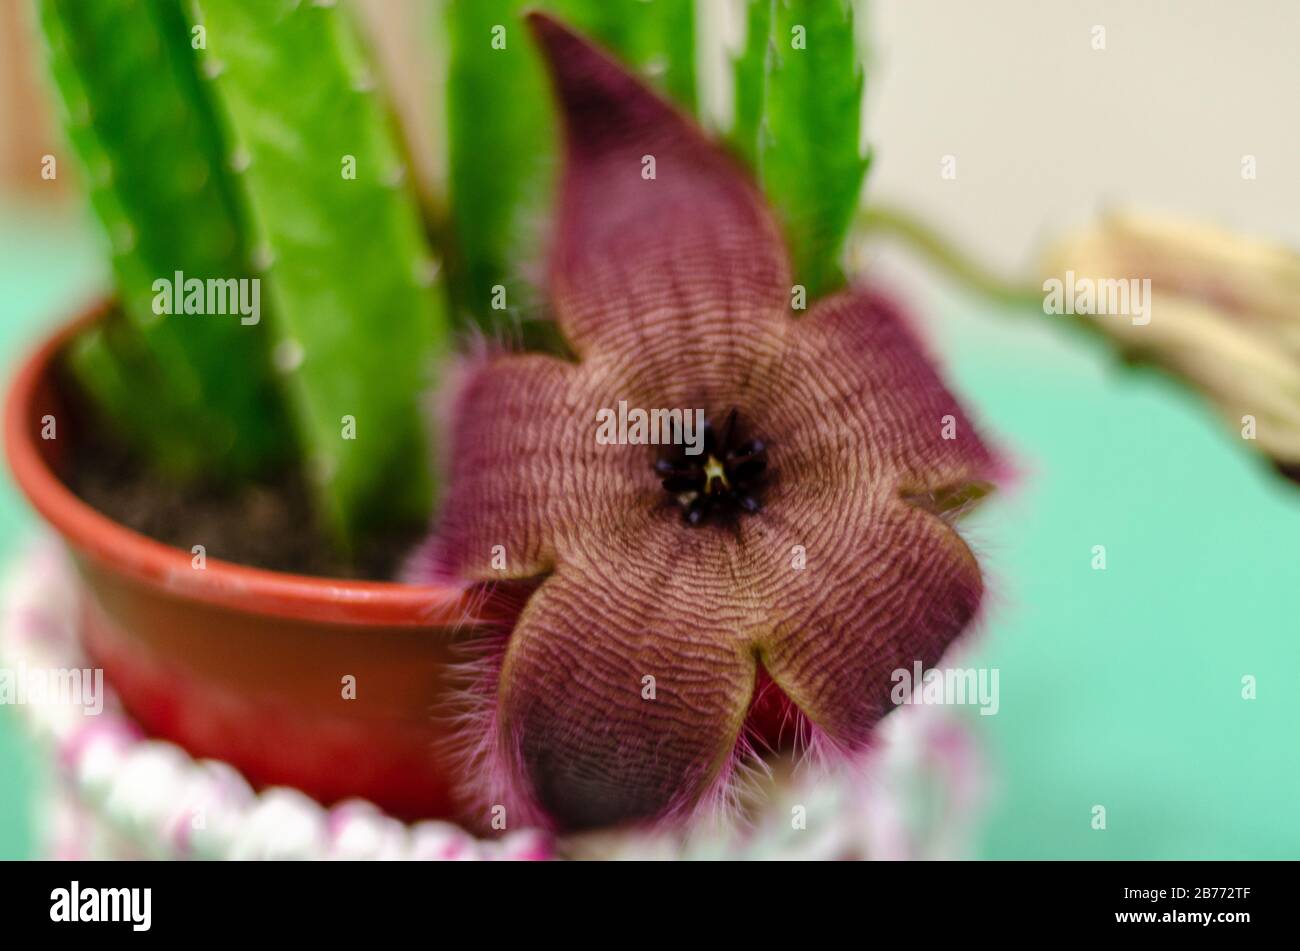 Close-up of a cactus stapelia flower open in a pot with a sheath of totora fabric on a green table Stock Photo